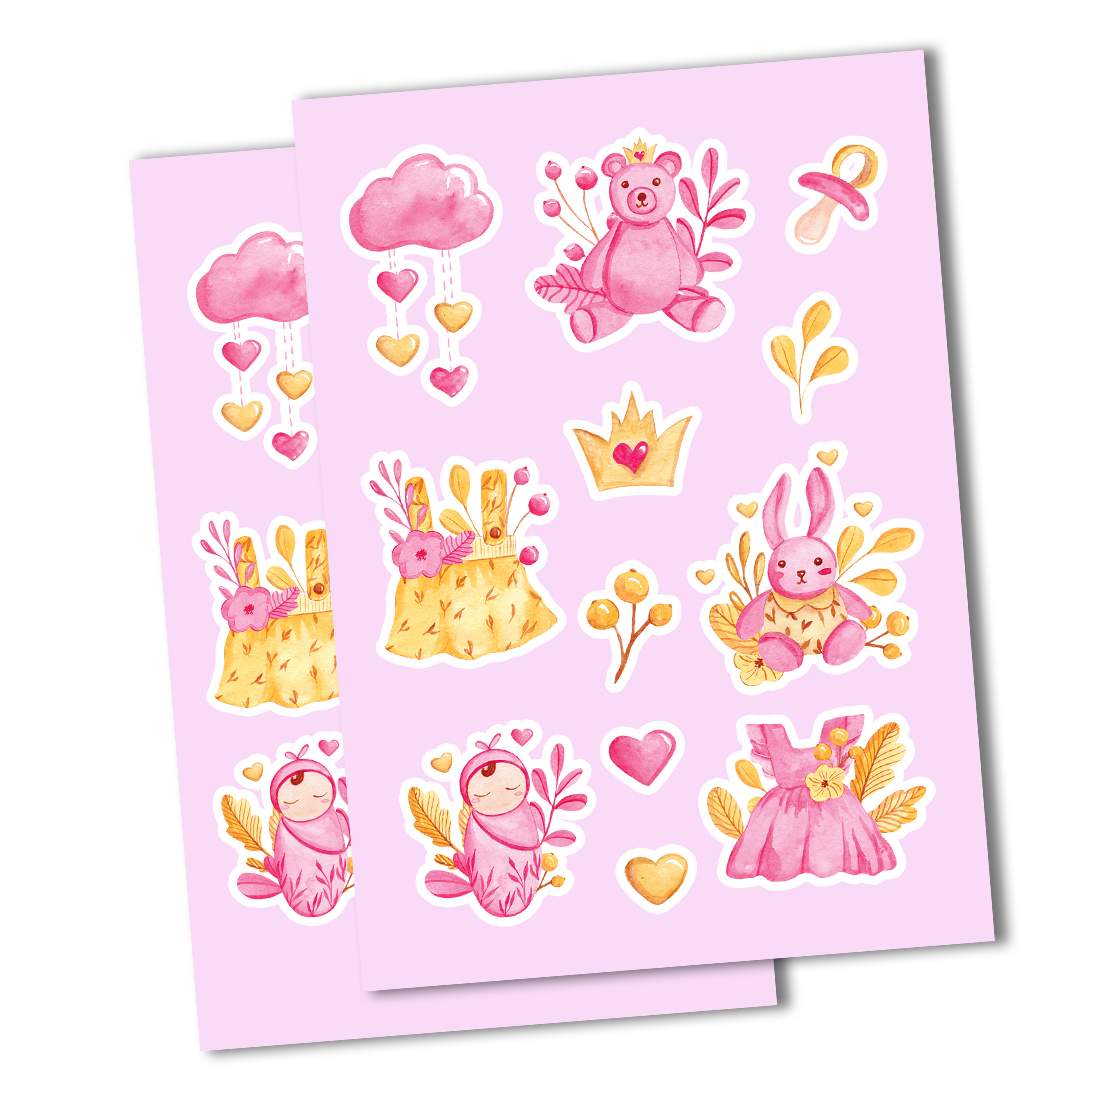 Pink nursery sticker pack preview image.